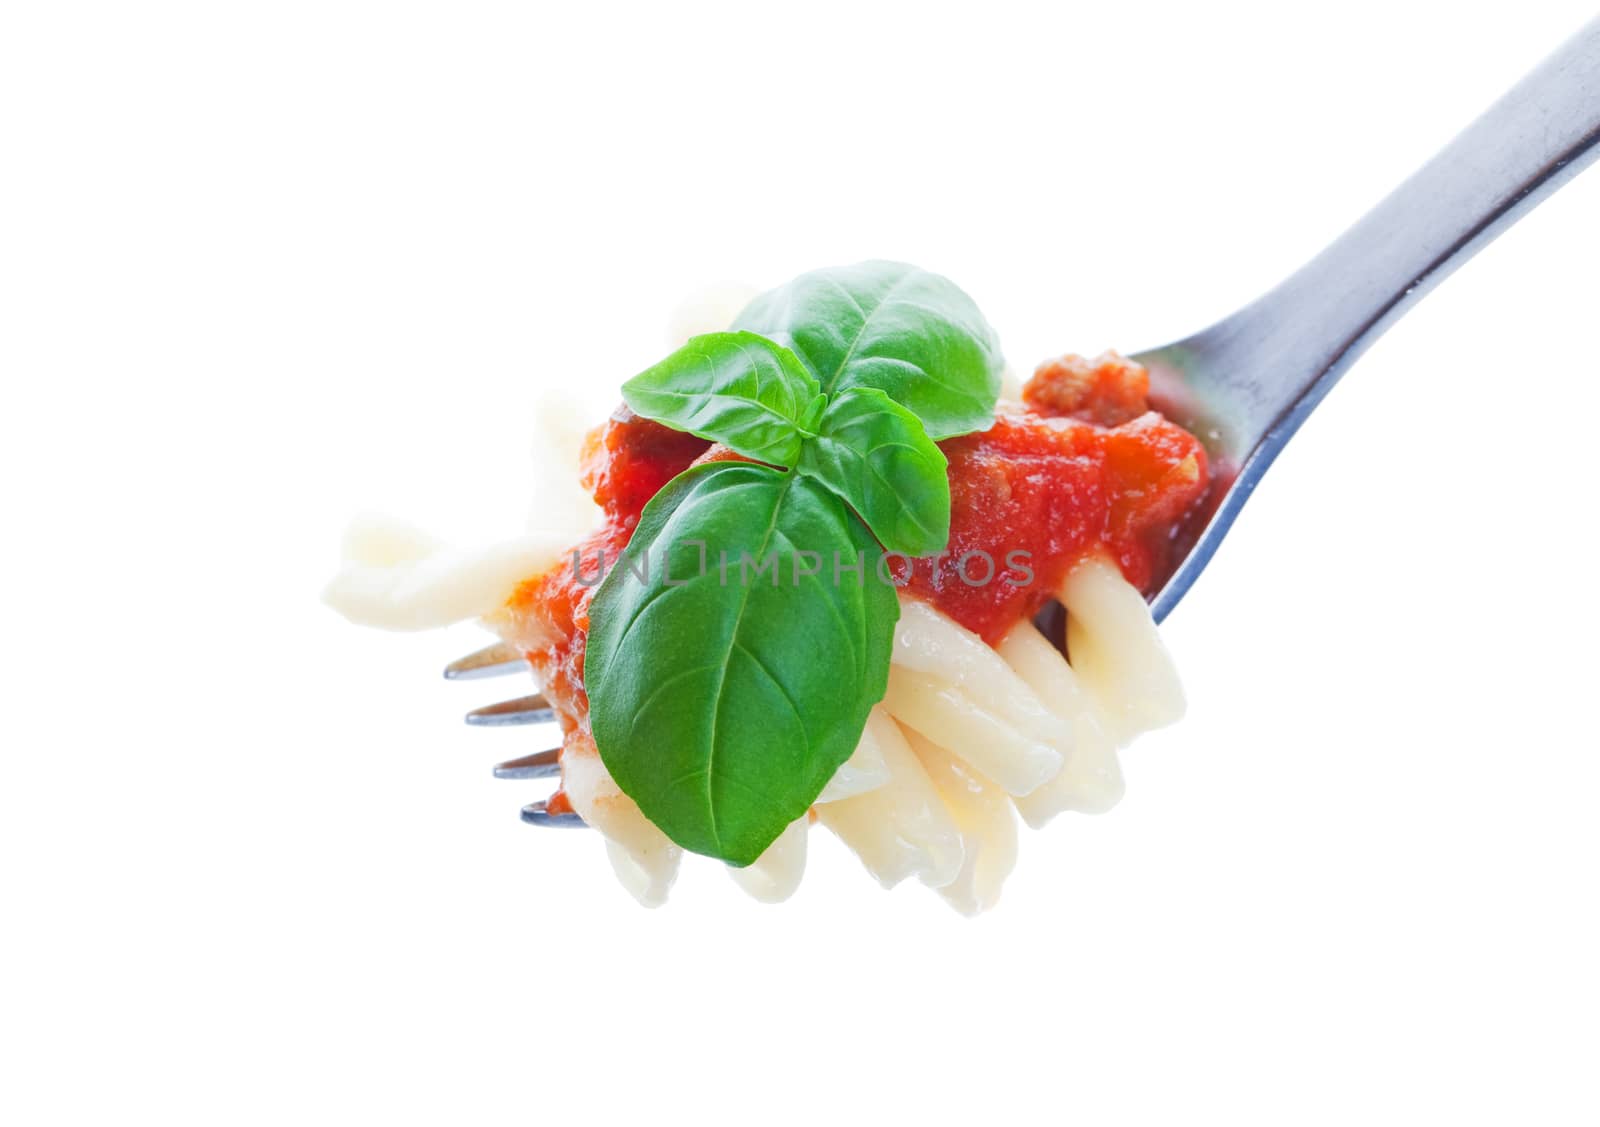 Pasta Fork with Basil by songbird839